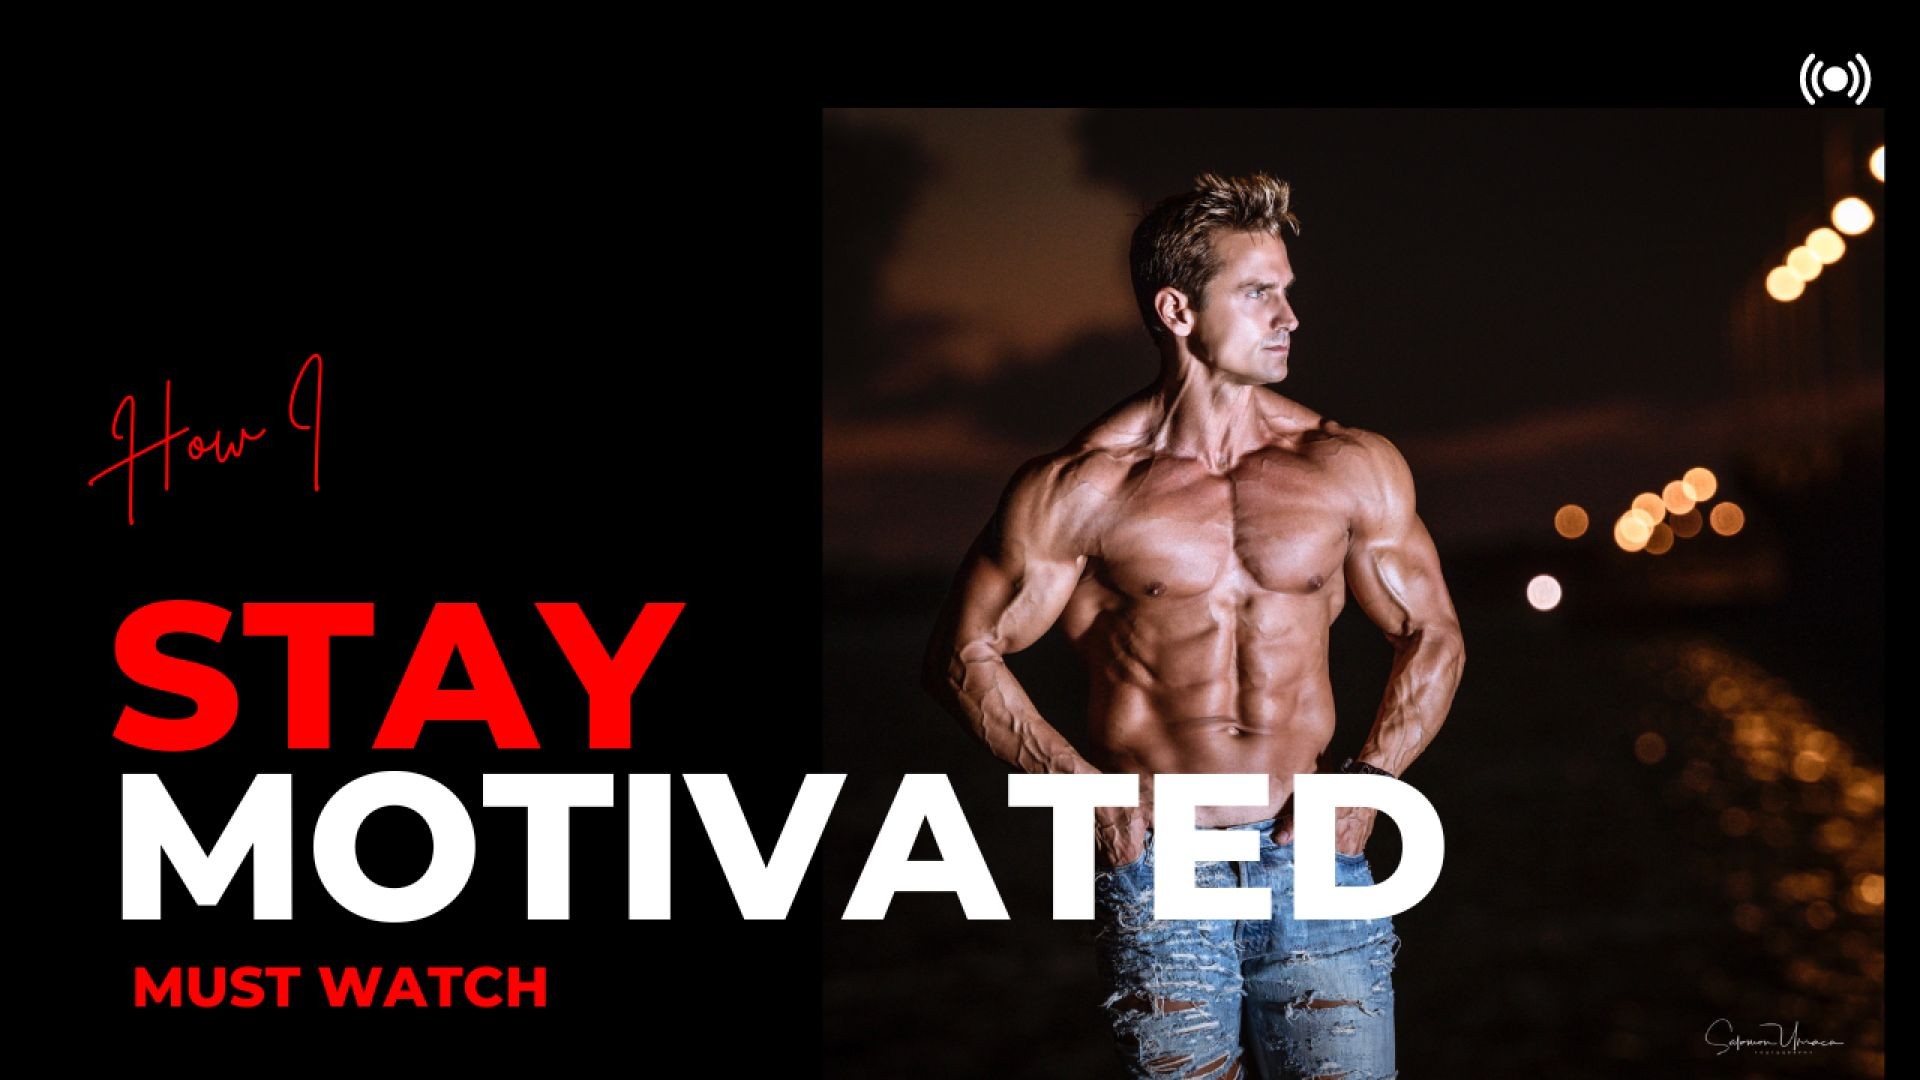 How Dymatize Athlete David Morin Stays Motivated